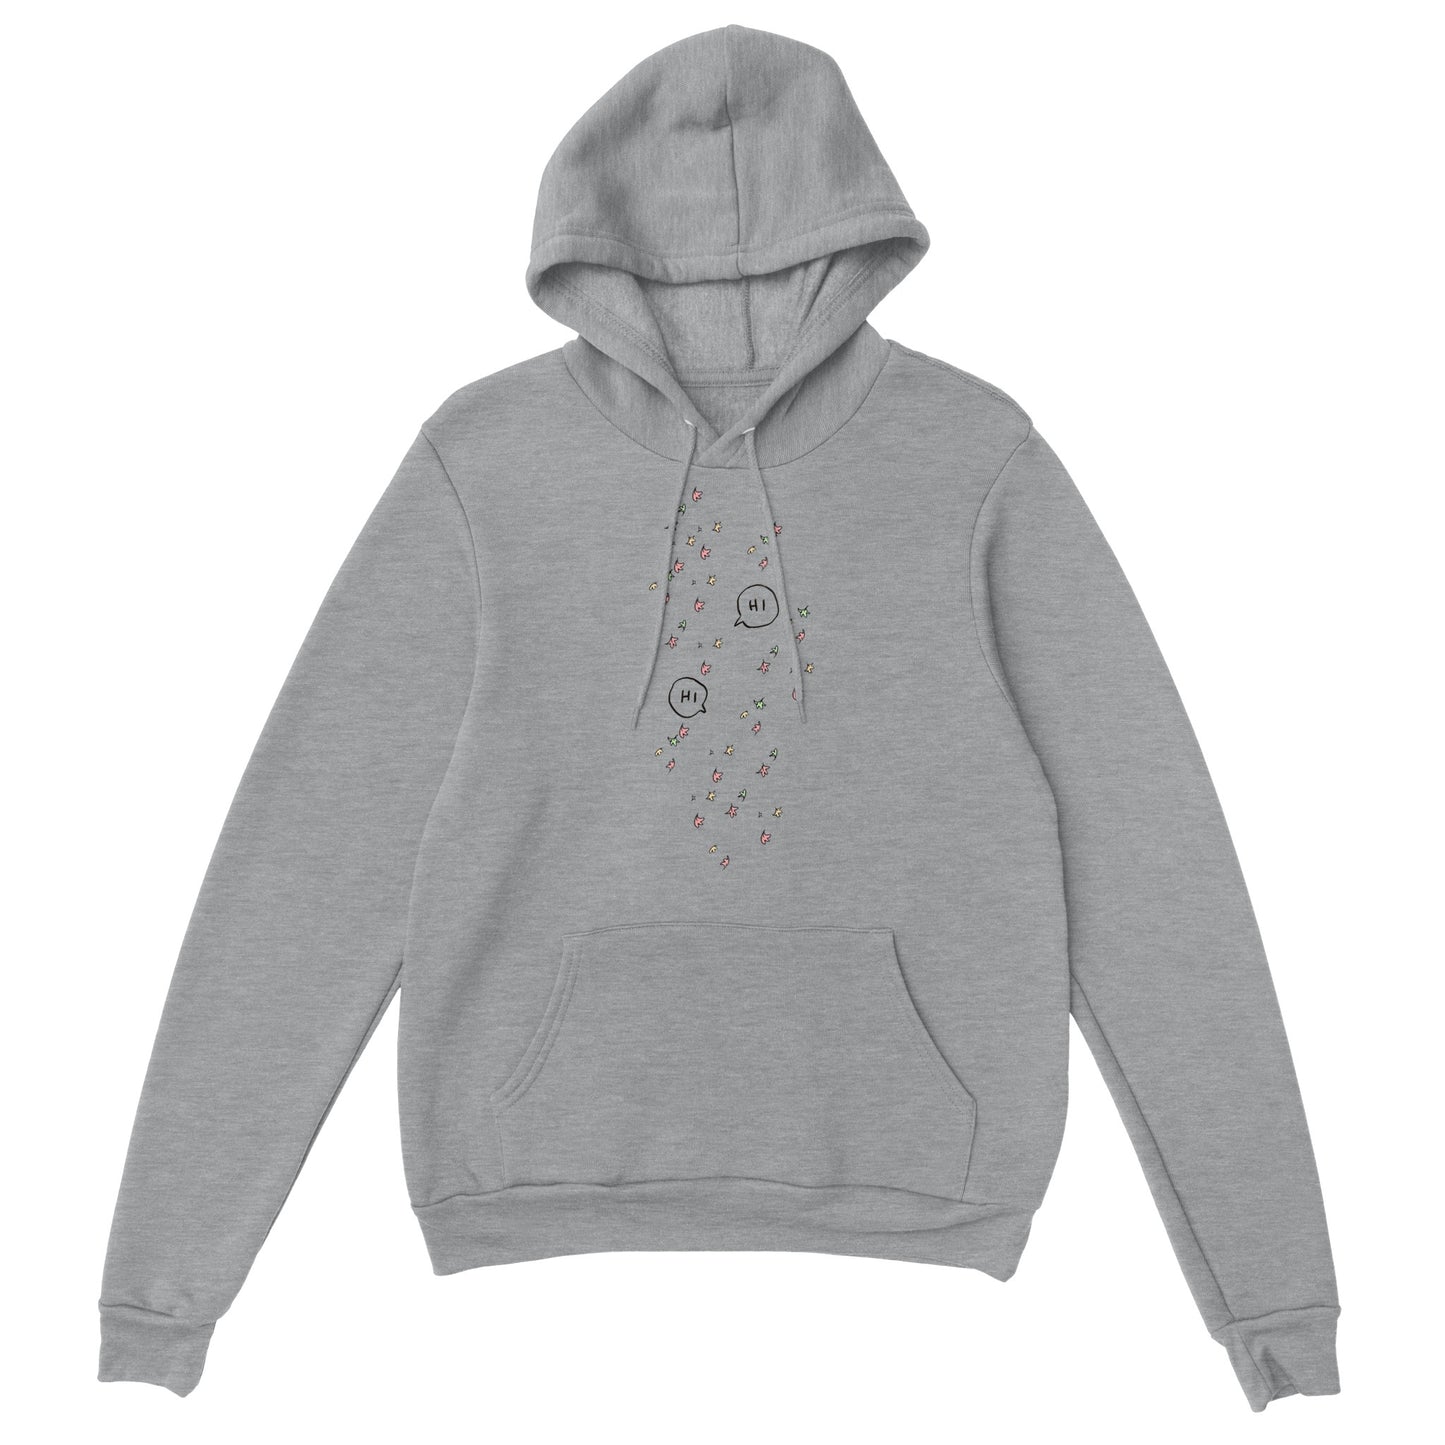 Embrace Romance: 'Hi Leaves' Heartstopper Inspired Premium Unisex Pullover Hoodie Clothes By Tobey Alexander